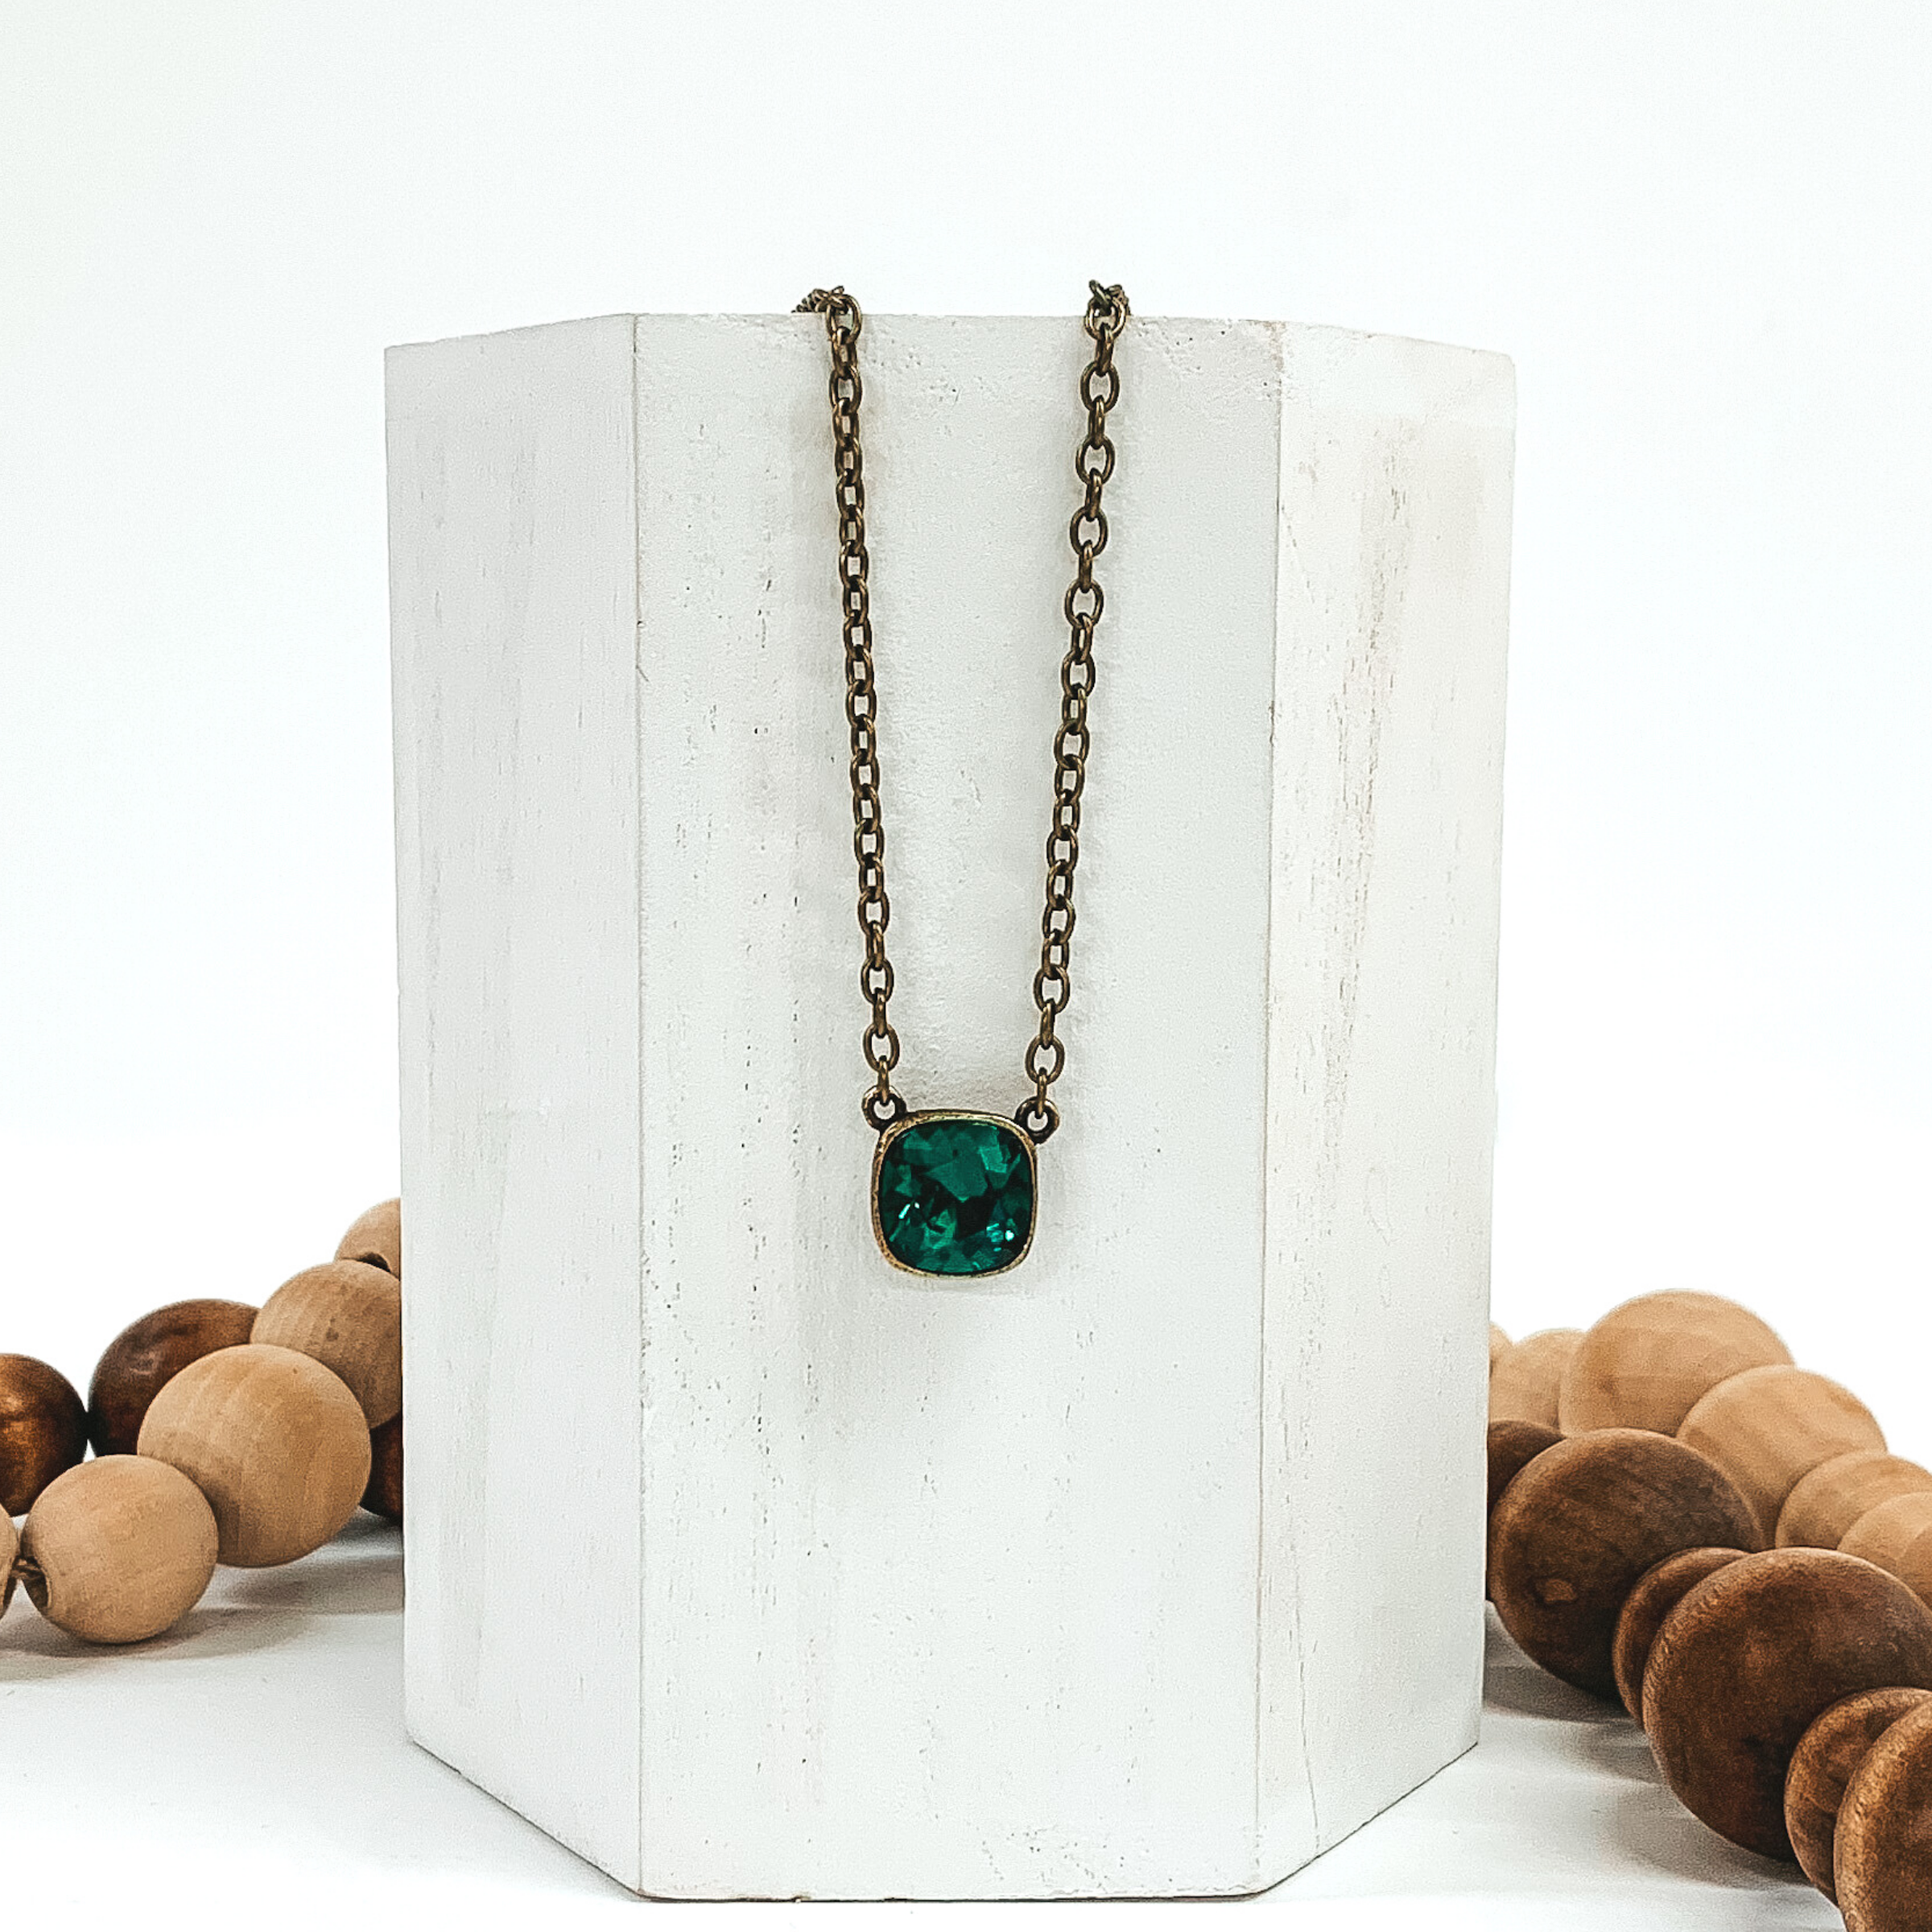 Bronze chained necklace with a square emerald crystal pendant. The necklace is hanging on a white block that is in front of tan and brown beads. 